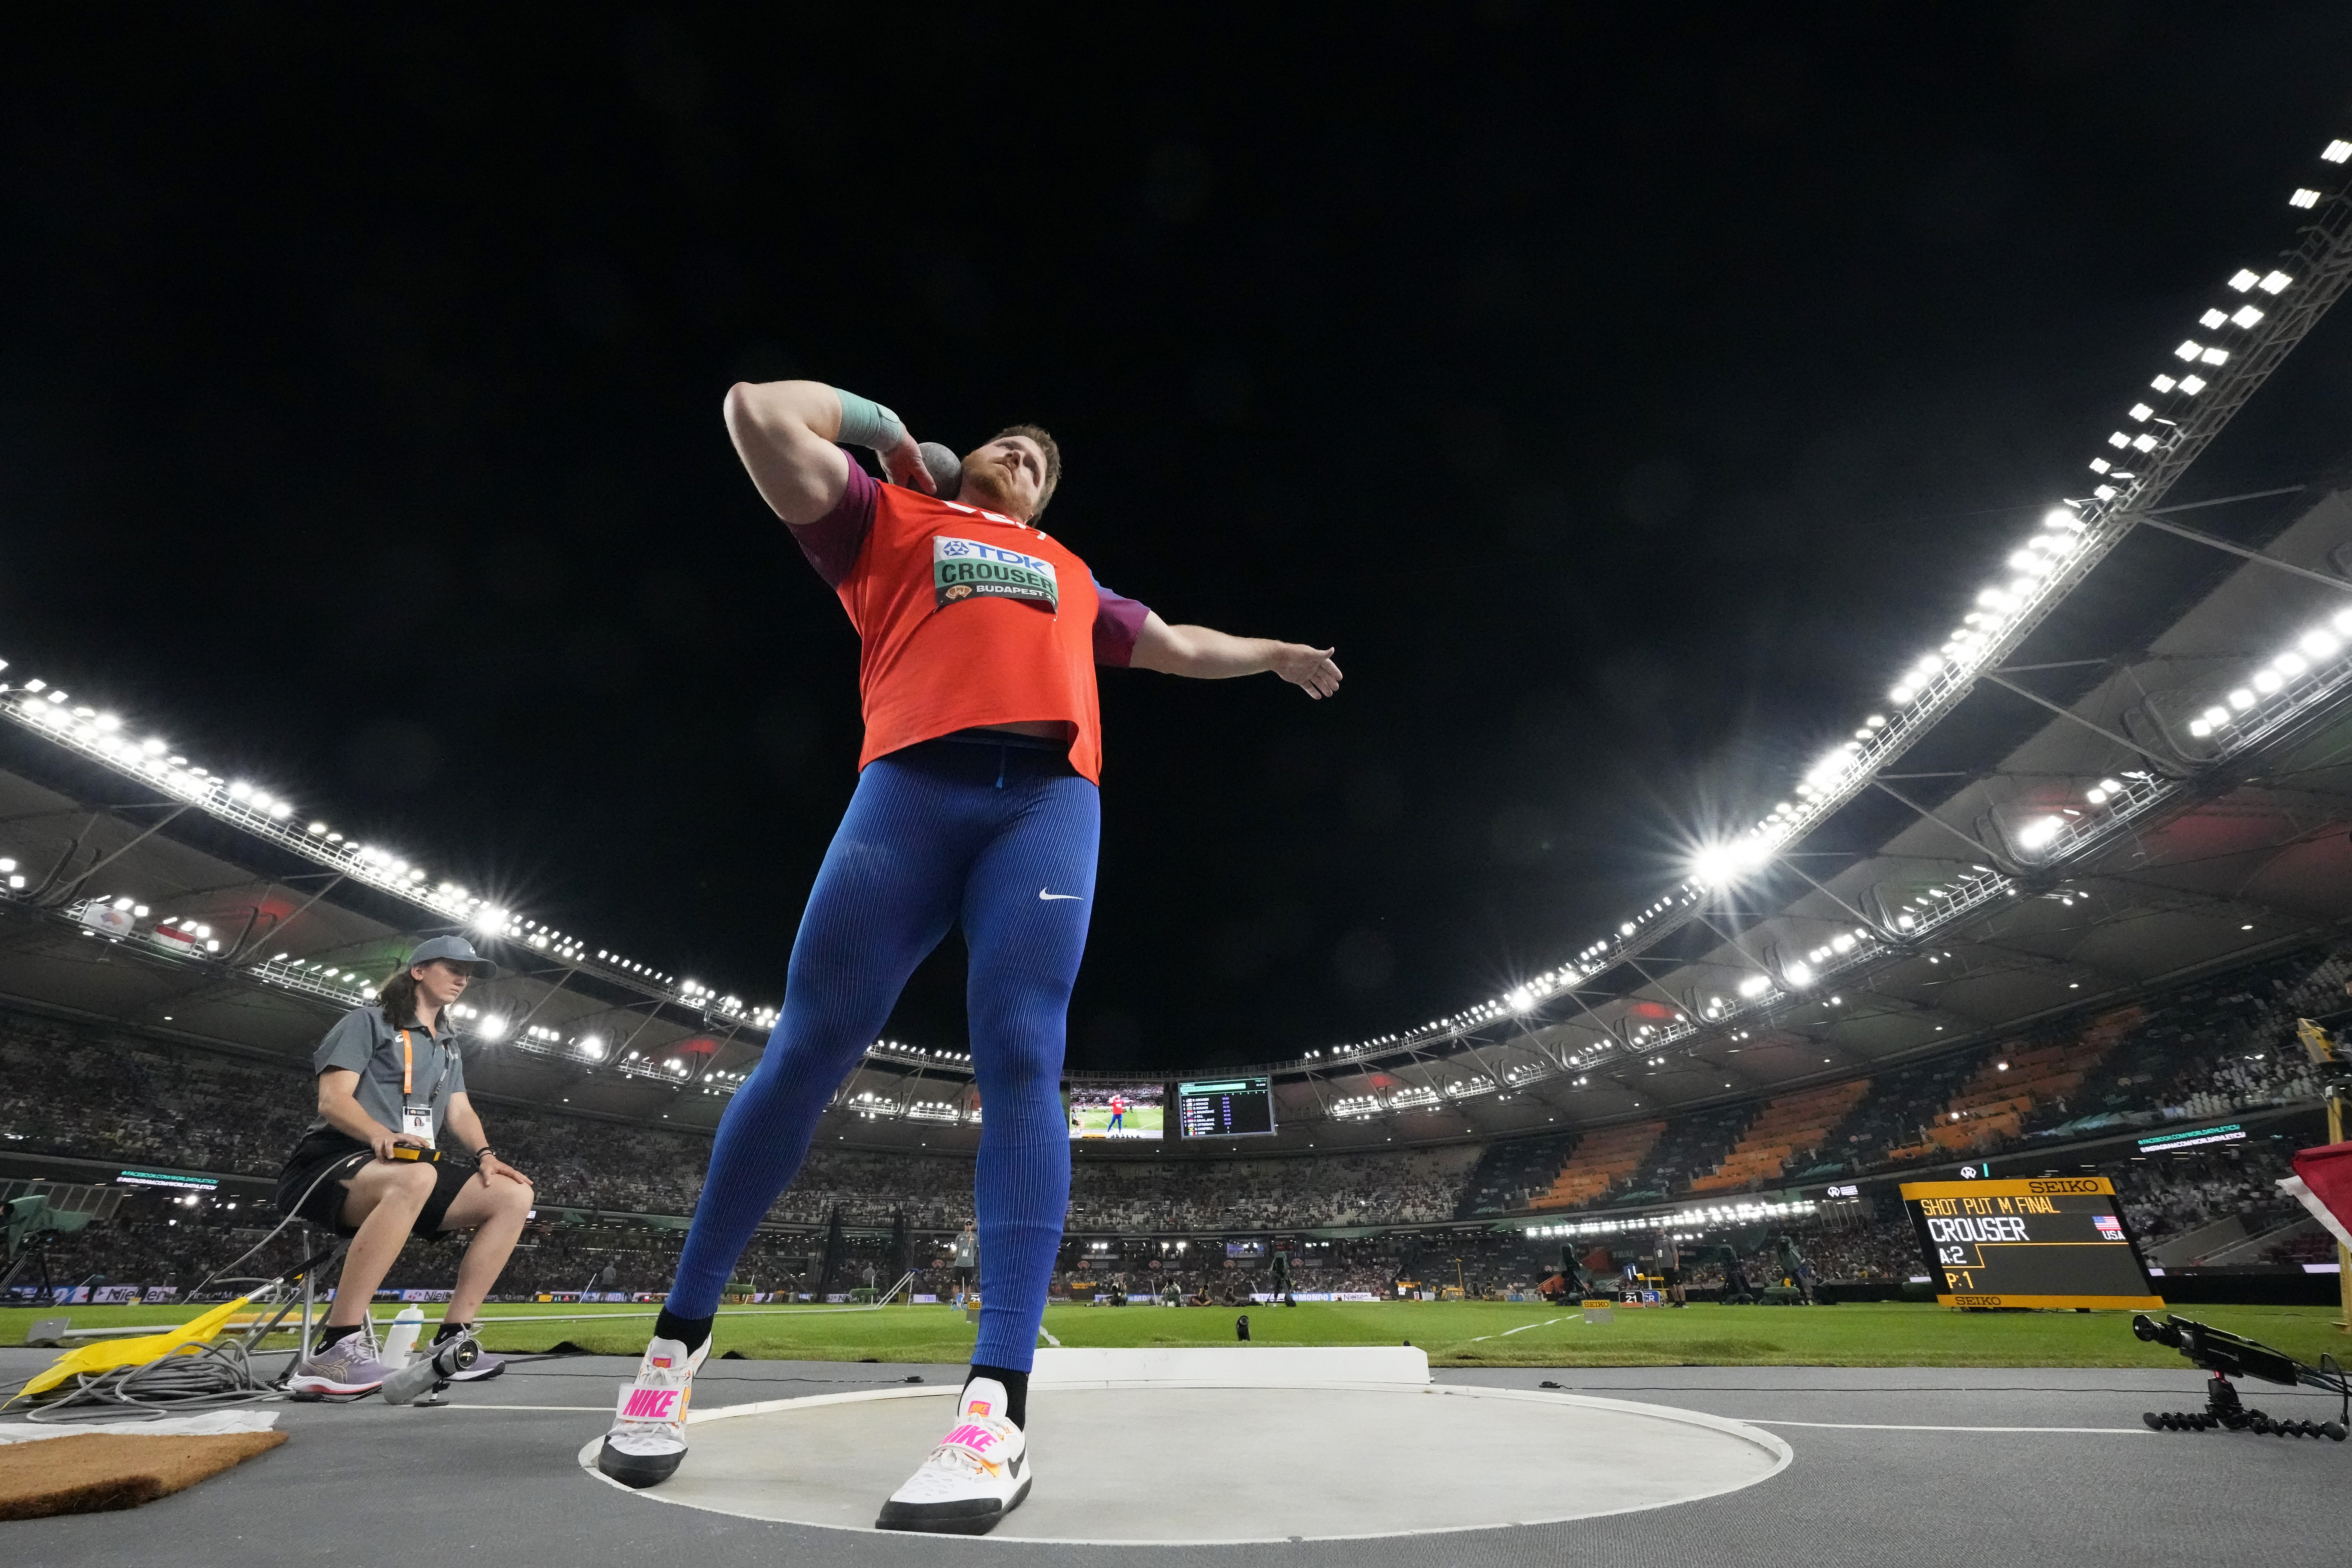 Crouser retains shot put title at worlds after nearly staying home due to  blood clots